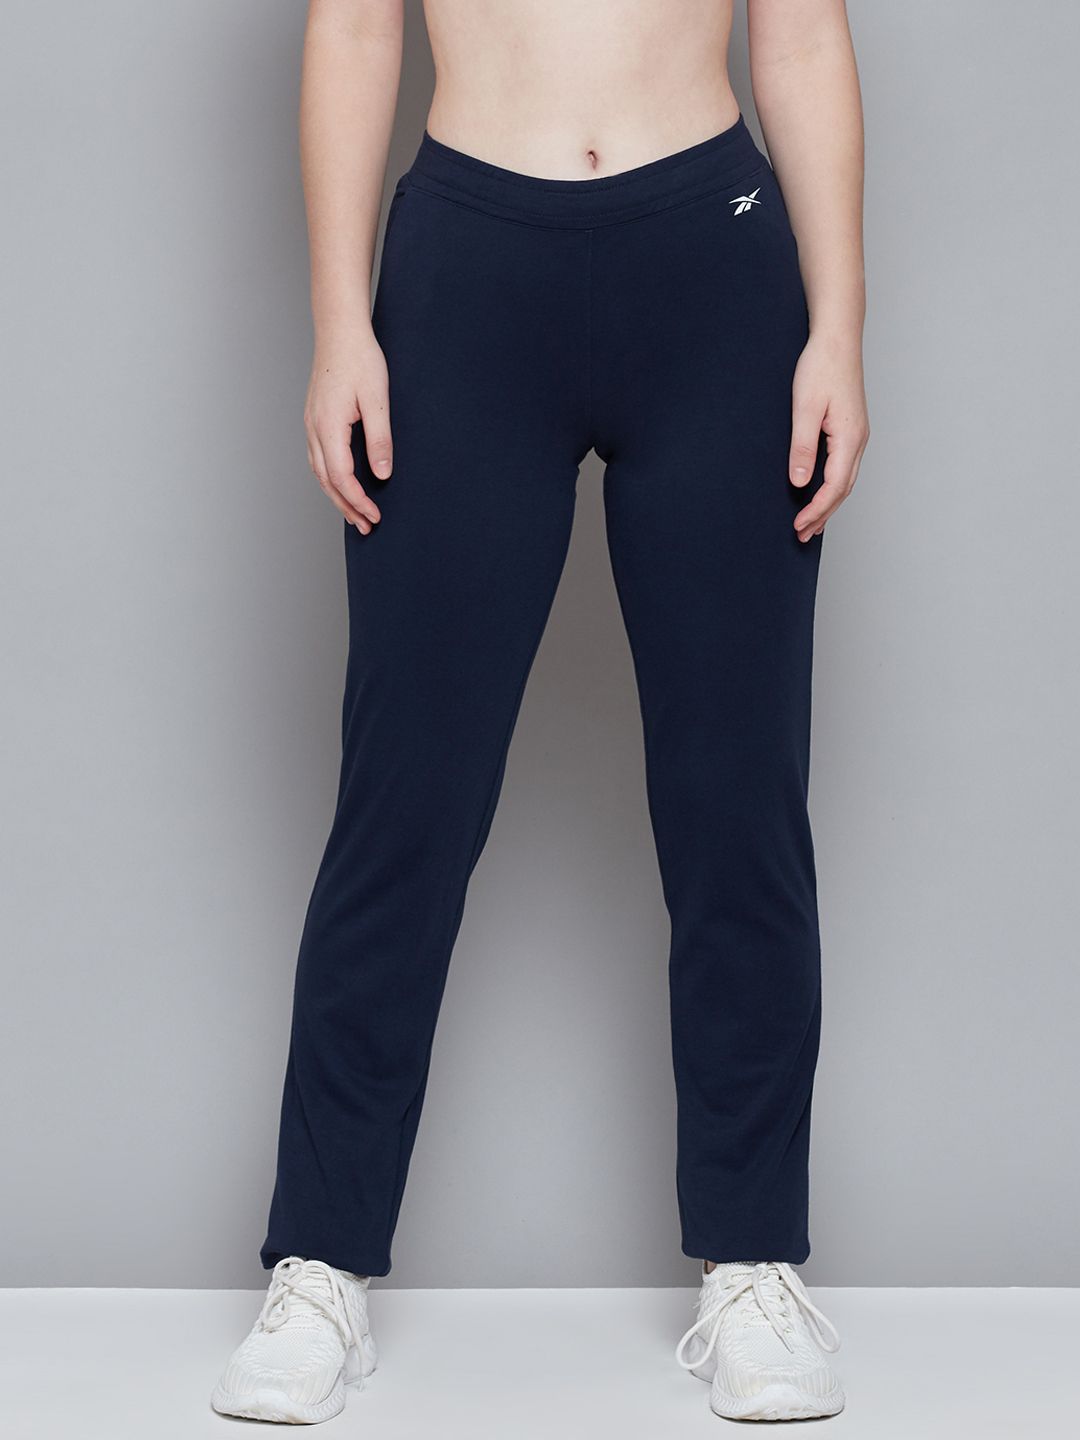 Reebok Women Navy Blue Solid Pace Pure Cotton Track Pants Price in India